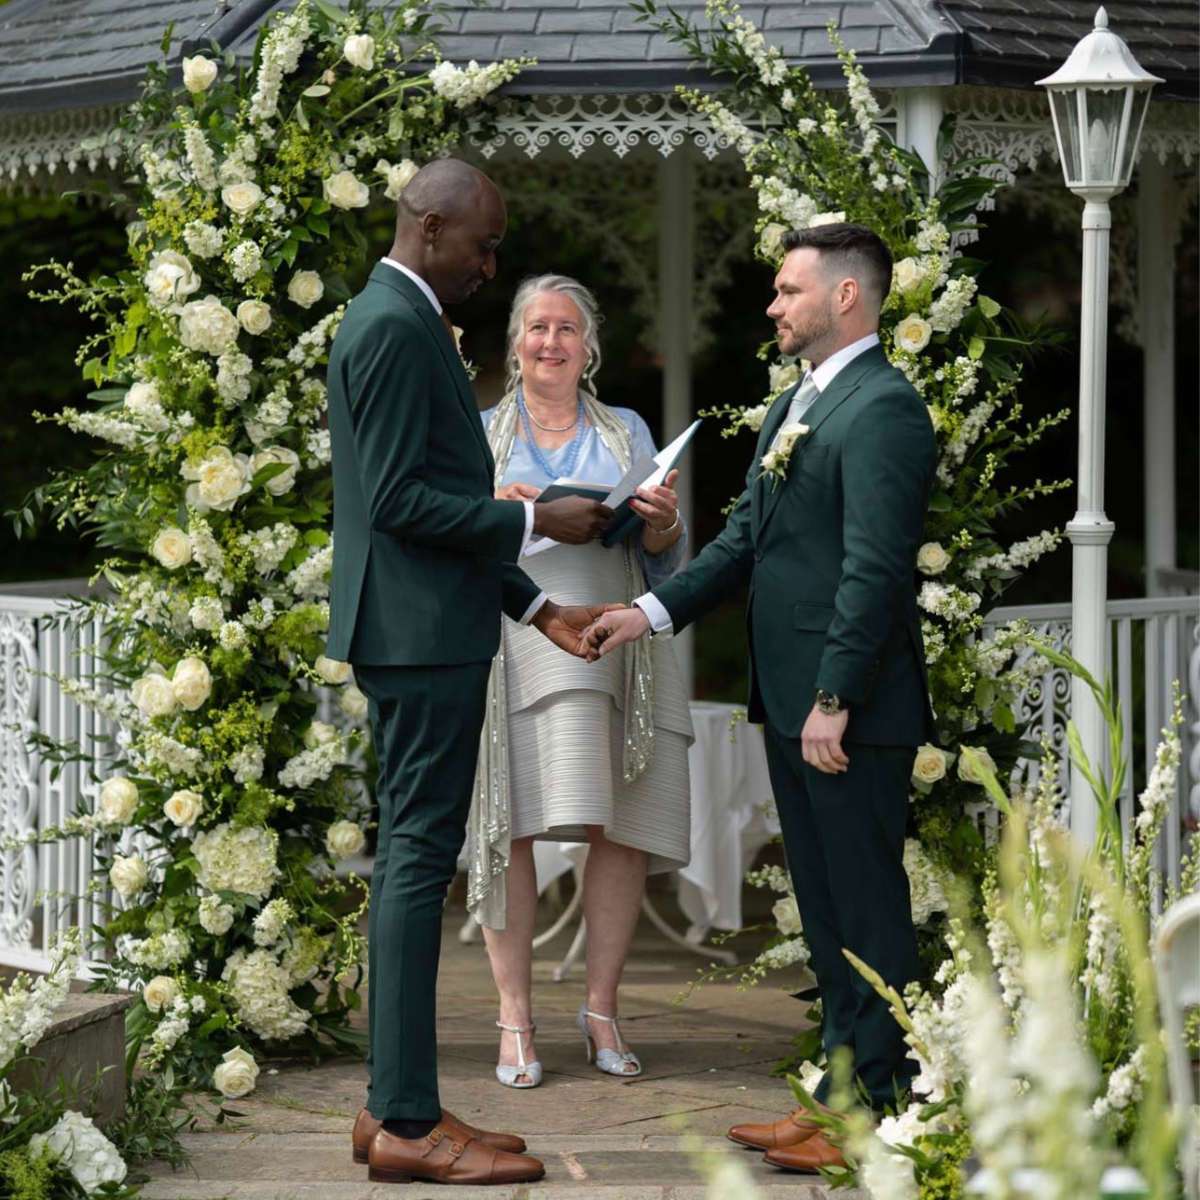 Catherine is standing under an arch of flowers during the ceremony of Emmett and Ayo who are both wearing dark green fitted suits and tan shoes. The couple are holding hands as Ayo is saying his vows.